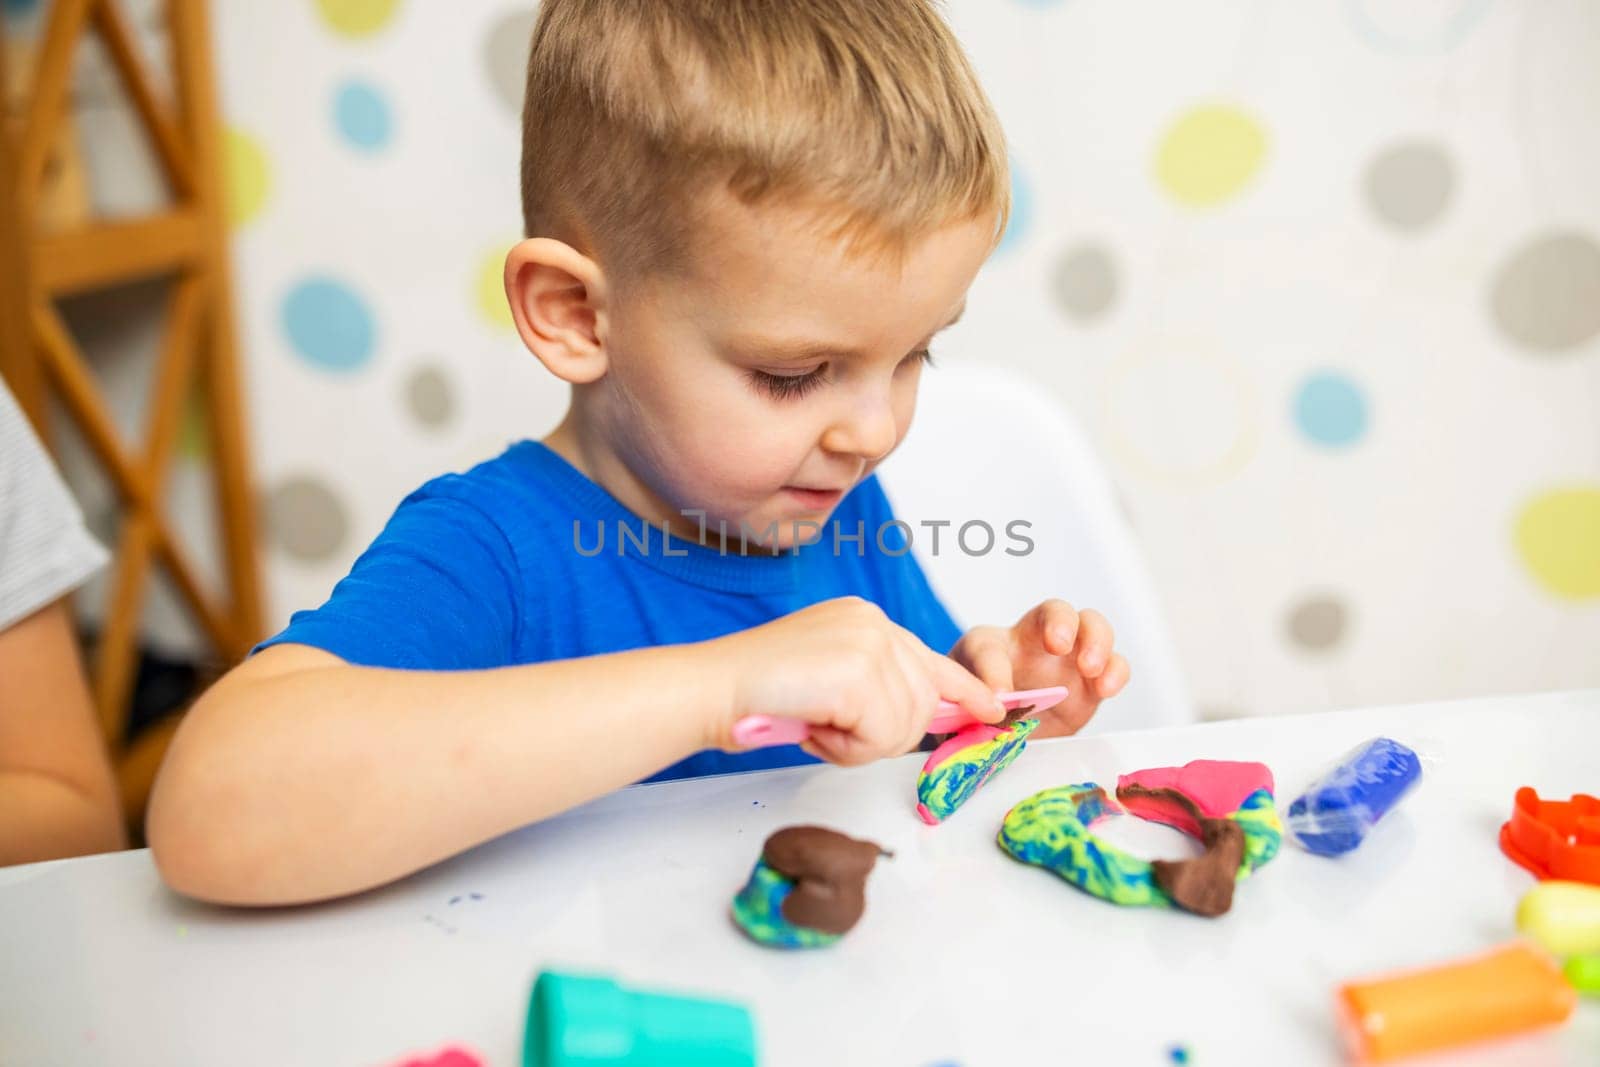 Little boy enthusiastically plays with plasticine, play dough on white table at home, children's creativity concept. Development of fine motor skills